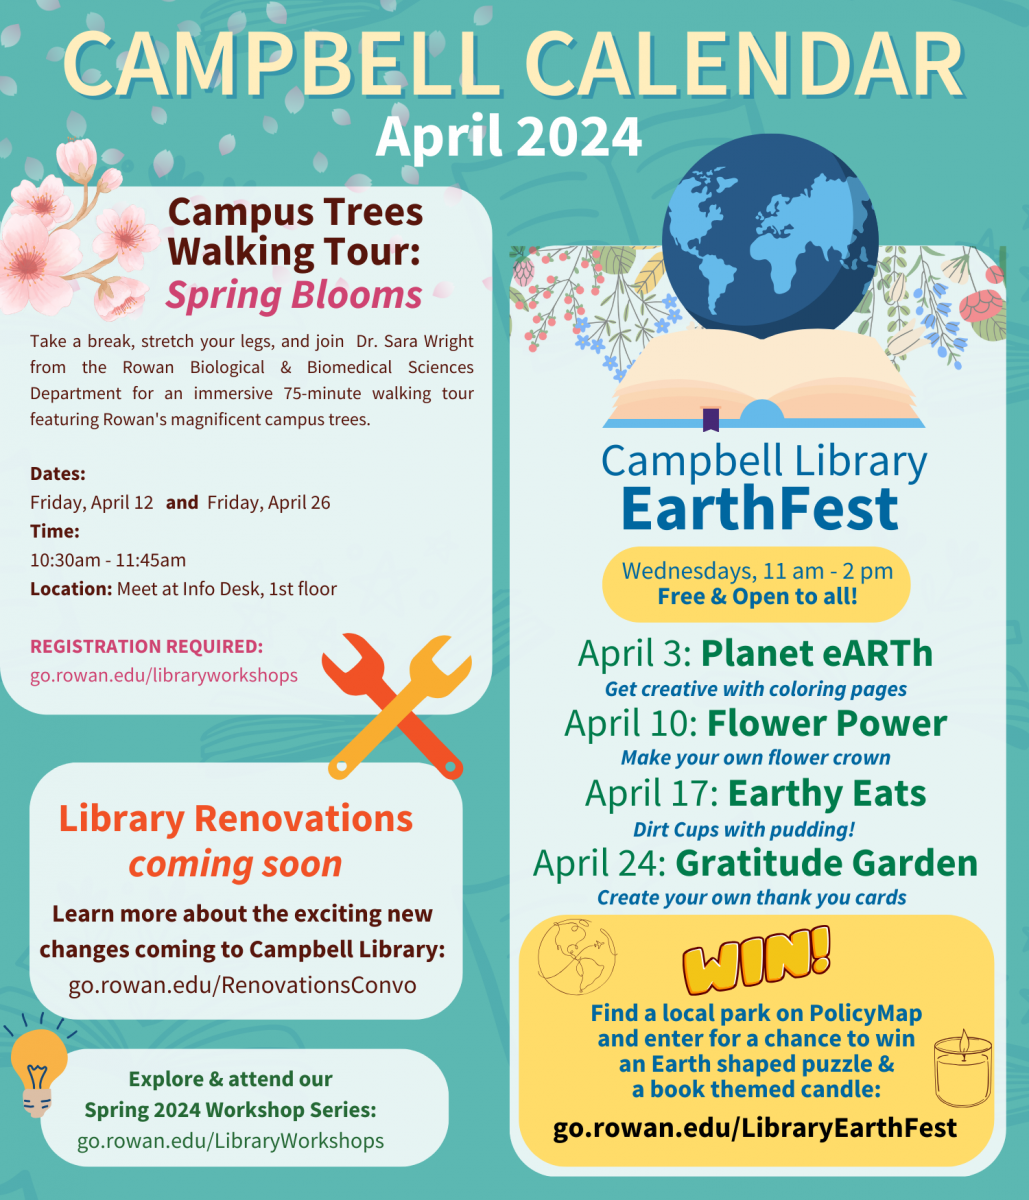 Campbell Calendar: April 2024  Campus Trees Walking Tour: Spring Blooms: Take a break, stretch your legs, and join  Dr. Sara Wright from the Rowan Biological & Biomedical Sciences Department for an immersive 75-minute walking tour featuring Rowan's magnificent campus trees.  Dates: Friday, April 12  & Friday, April 26  Time: 10:30am - 11:45am  Location: Meet at Info Desk, 1st floor  Registration required: go.rowan.edu/libraryworkshops  Library Renovations: coming soon  Learn more about the exciting new changes coming to Campbell Library: go.rowan.edu/RenovationsConvo  Explore & attend our Spring 2024 Workshop Series: go.rowan.edu/LibraryWorkshops  Campbell Library EarthFest: Wednesdays, 11 am - 2 pm - Free & Open to all!  April 3: Planet eARTh: Get creative with coloring pages  April 10: Flower Power: Make your own flower crown  April 17: Earthy Eats: Dirt Cups with pudding!  April 24: Gratitude Garden: Create your own thank you cards  ENTER TO WIN!  ​​​​​Find a local park on PolicyMap and enter for a chance to win an Earth shaped puzzle & a book themed candle: go.rowan.edu/LibraryEarthFest​​​​​​   ​​​​​